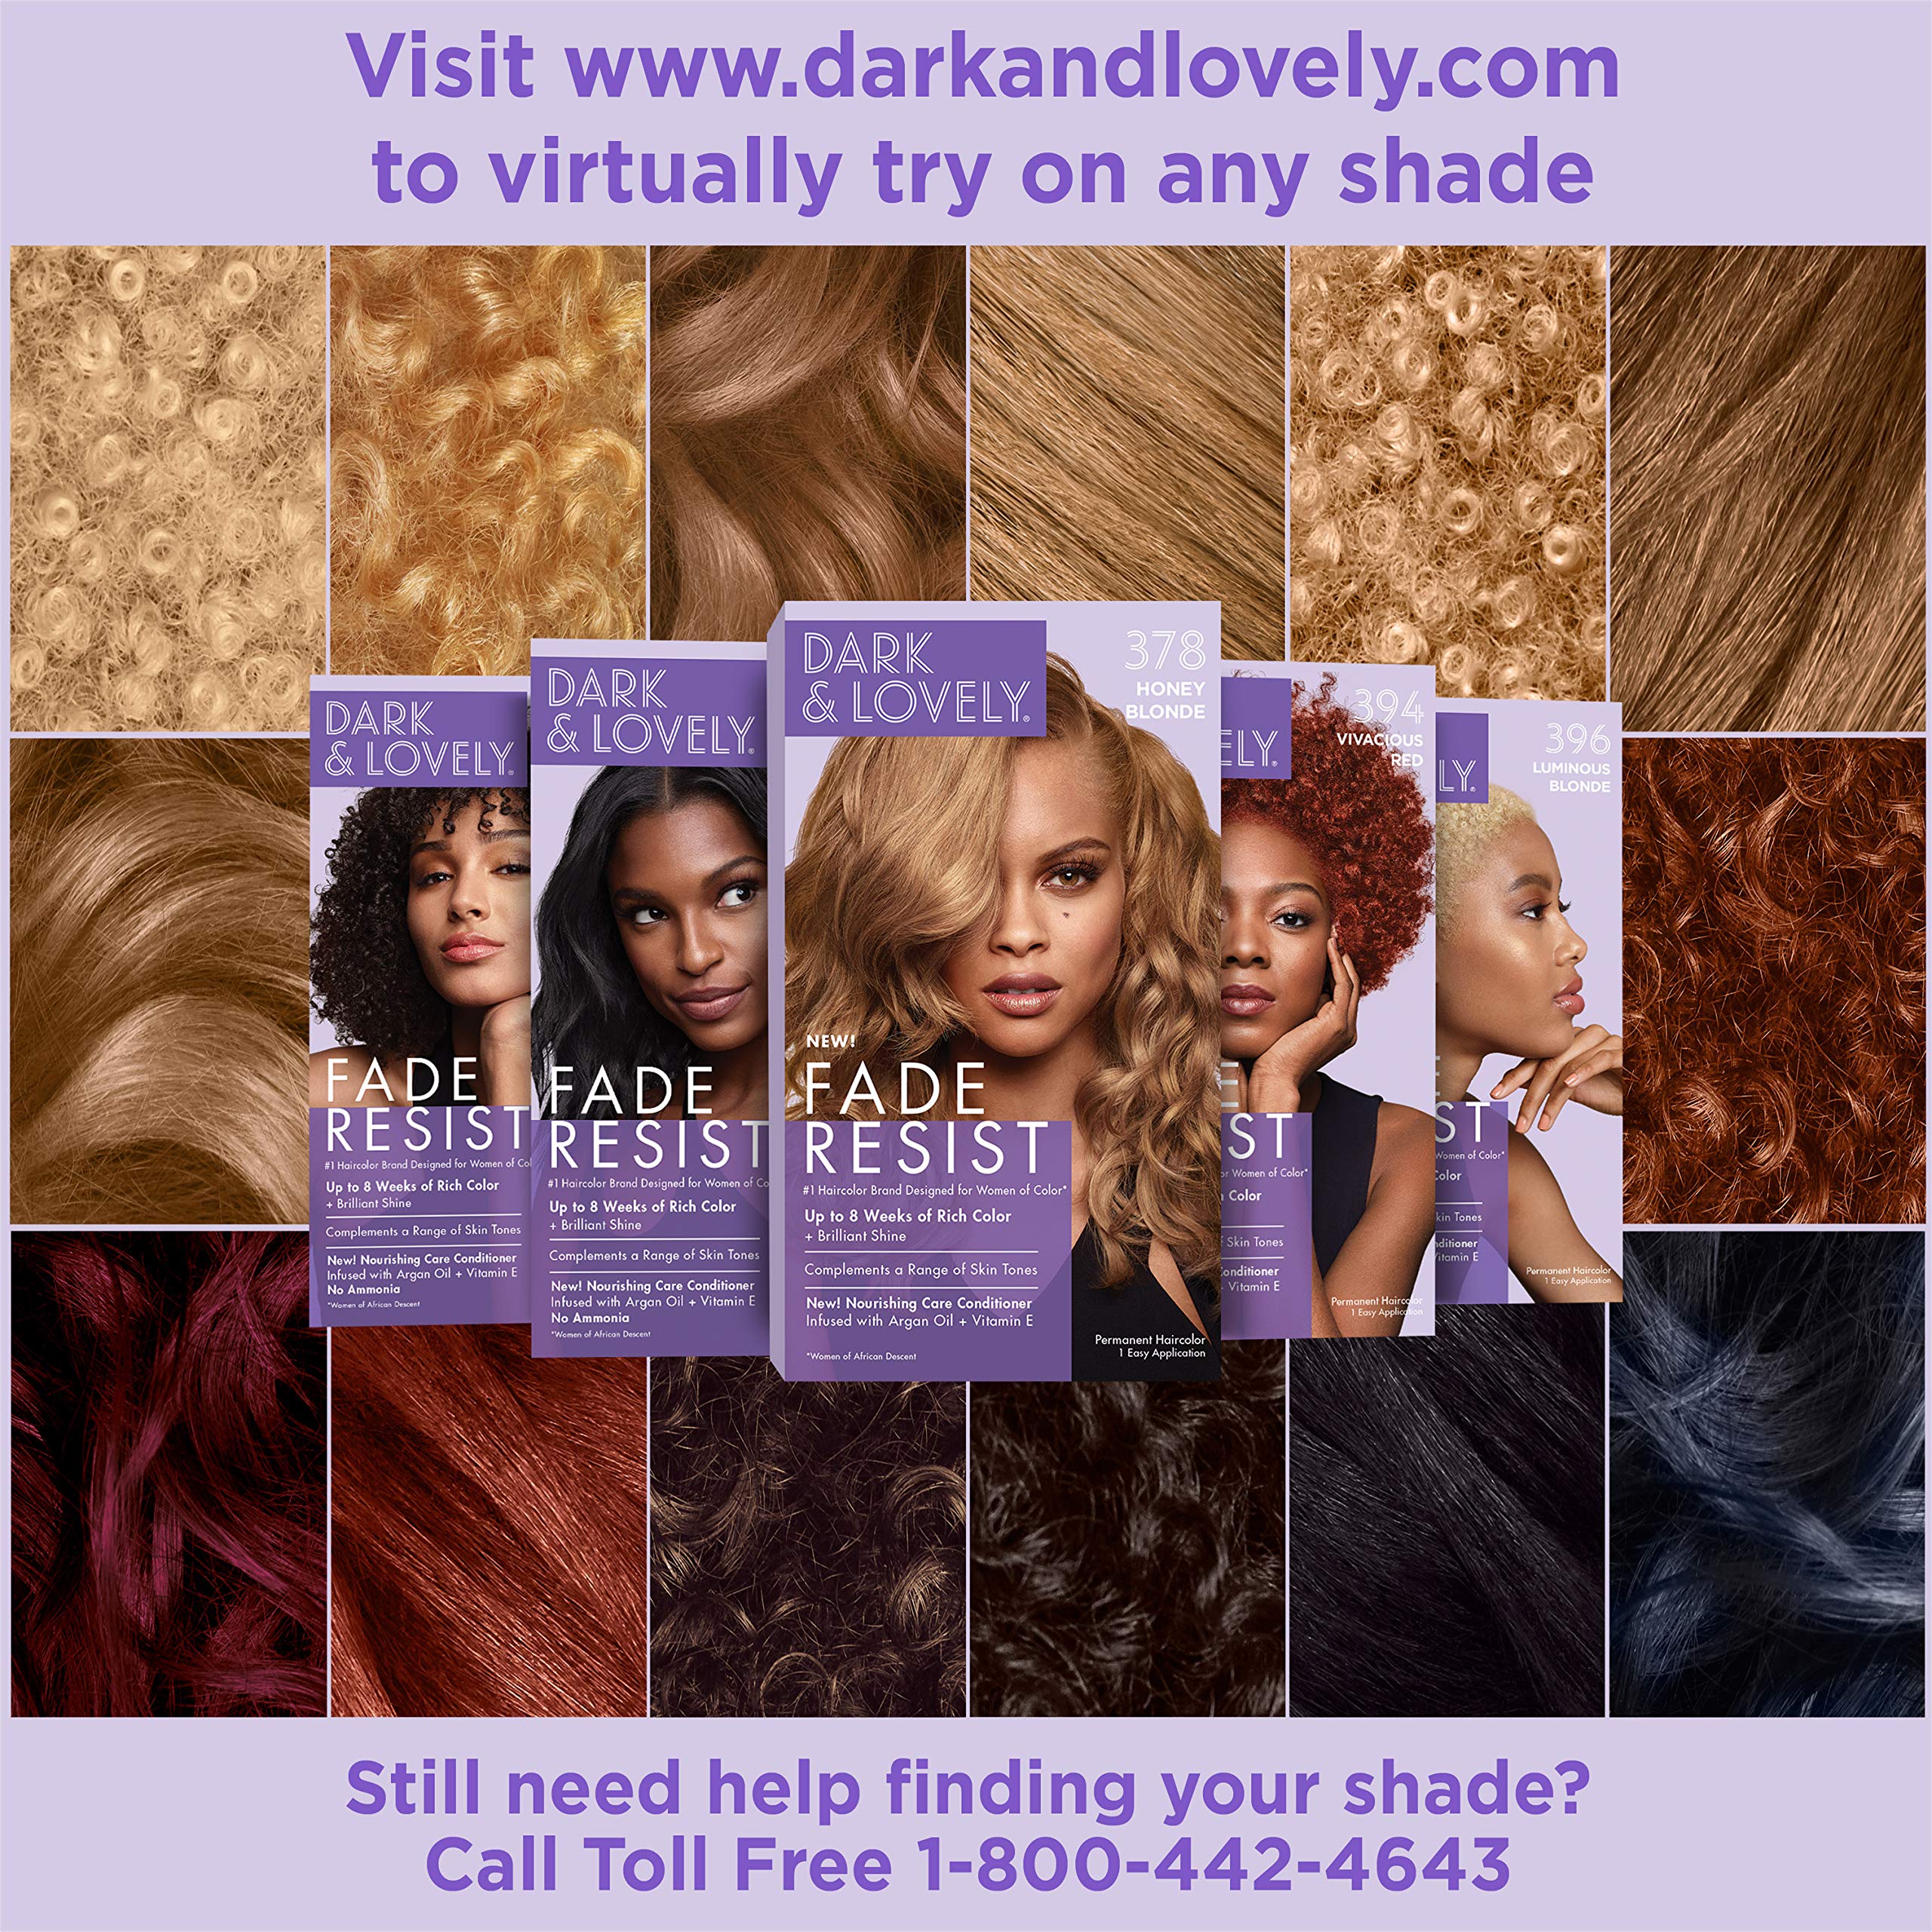 SoftSheen-Carson Dark and Lovely Fade Resist Rich Conditioning Hair Color, Permanent Hair Color, Up To 100 percent Gray Coverage, Brilliant Shine with Argan Oil and Vitamin E, Natural Black